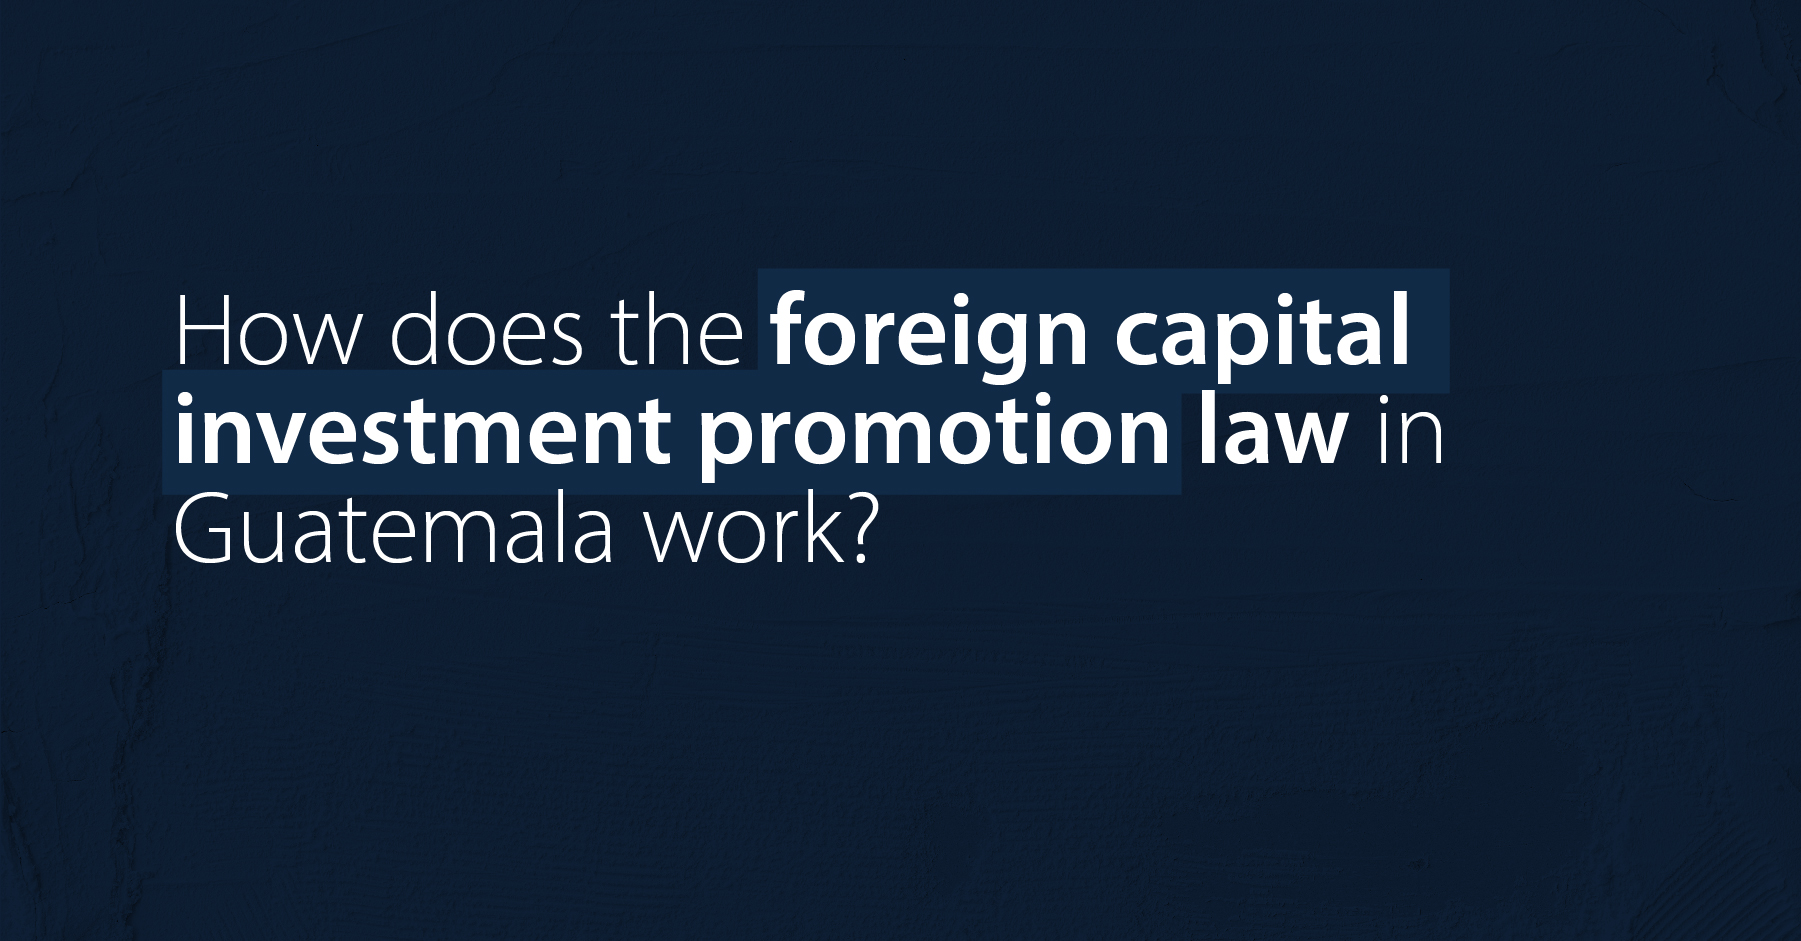 How does the foreign capital investment promotion law in Guatemala work?